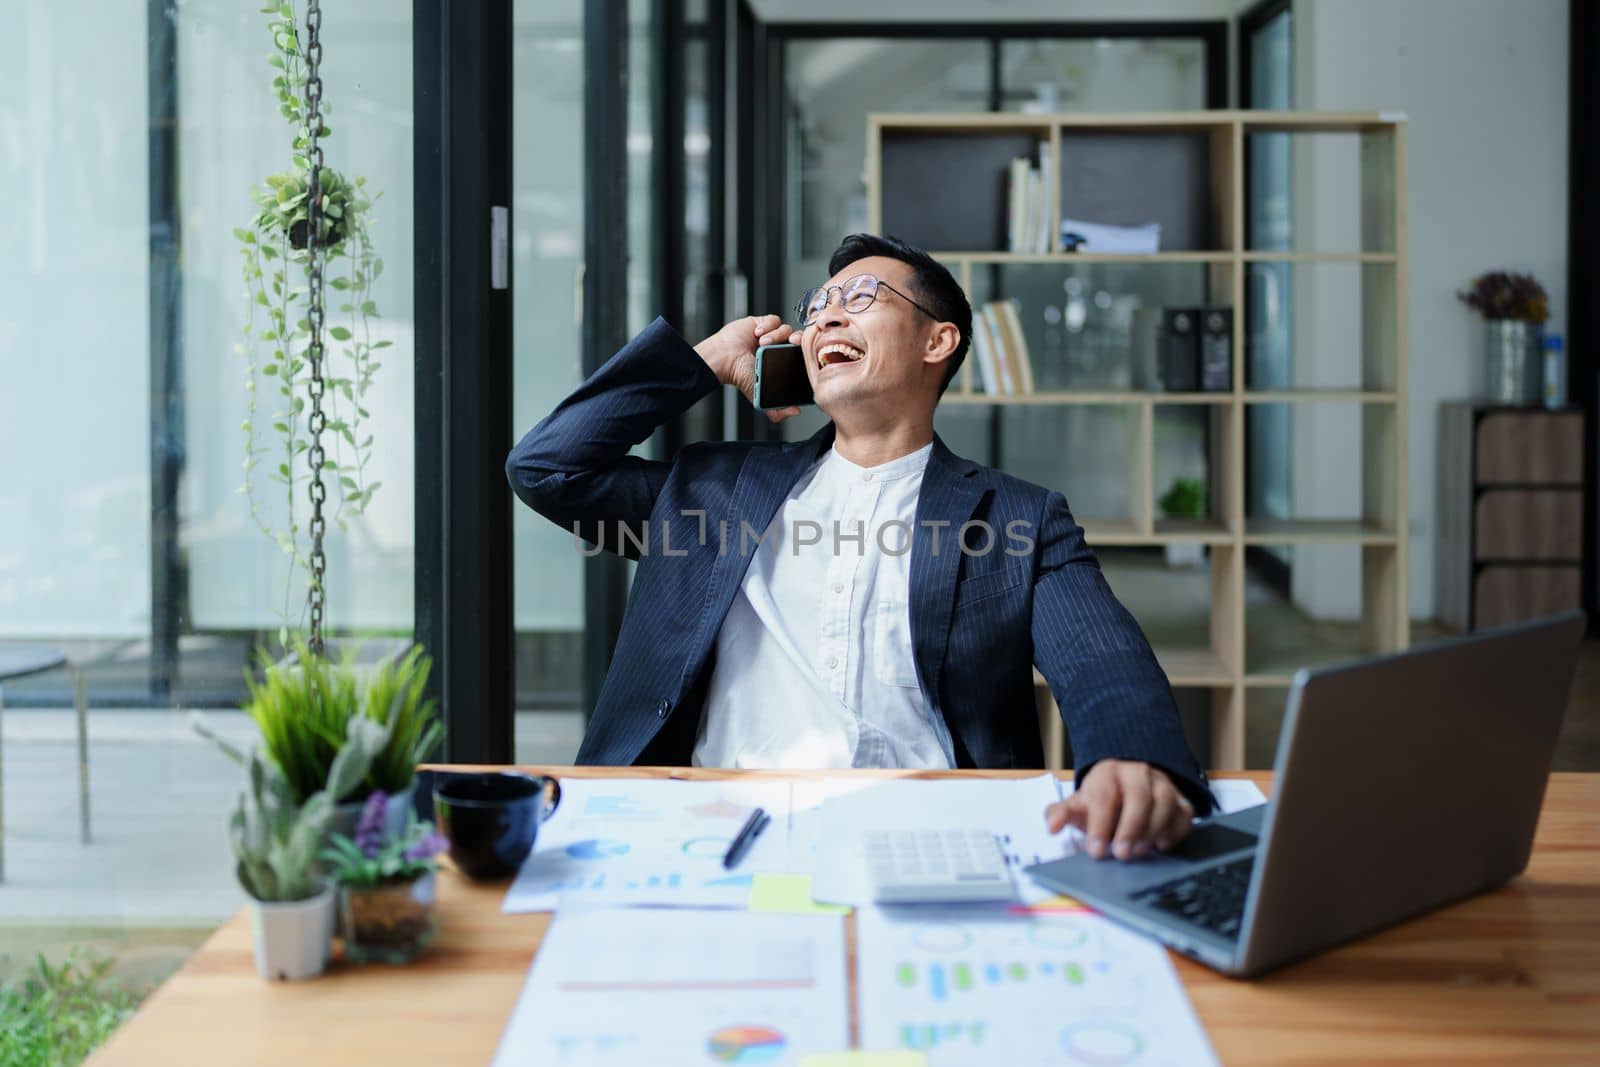 Portrait of a young Asian man showing a smiling face as she uses his phone, computer and financial documents on her desk in the early morning hours.